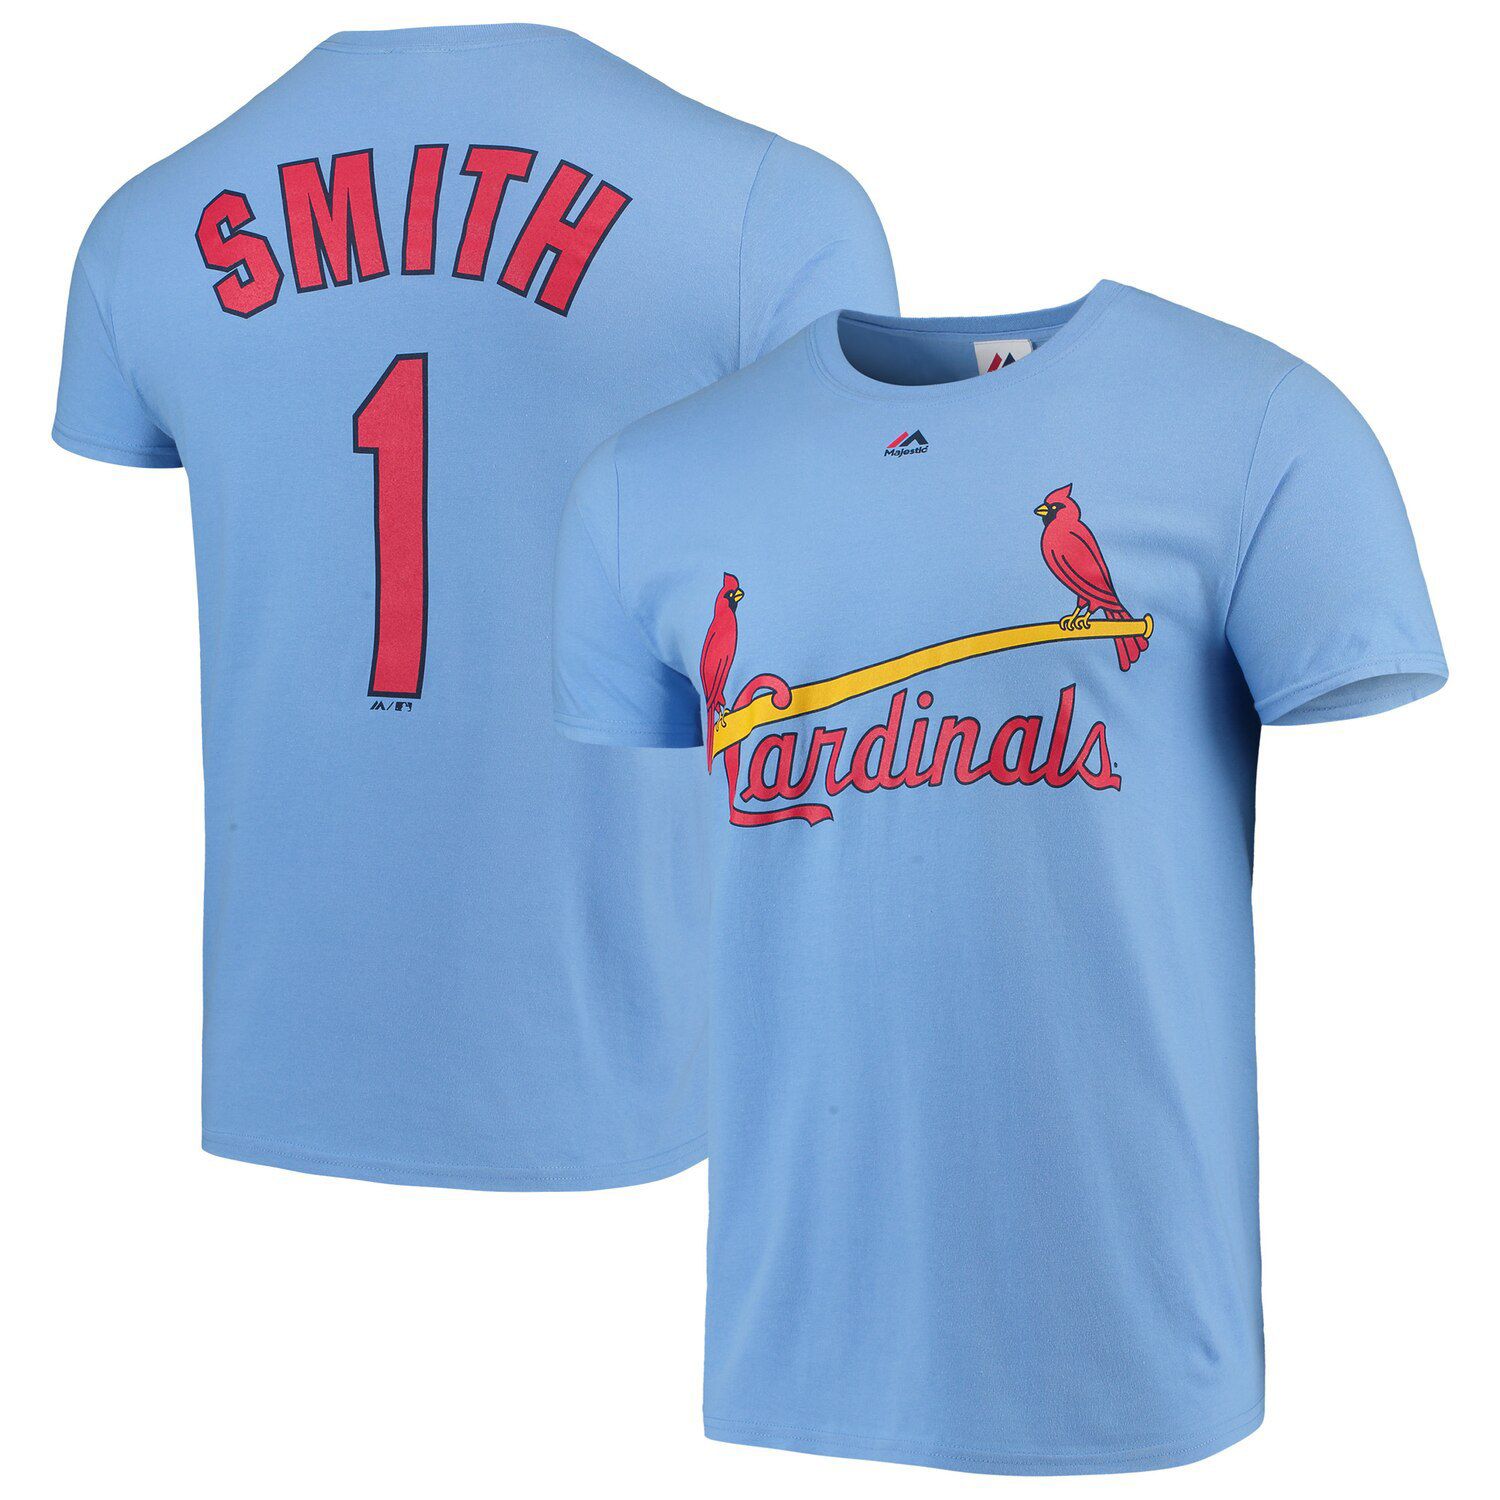 ozzie smith cooperstown jersey